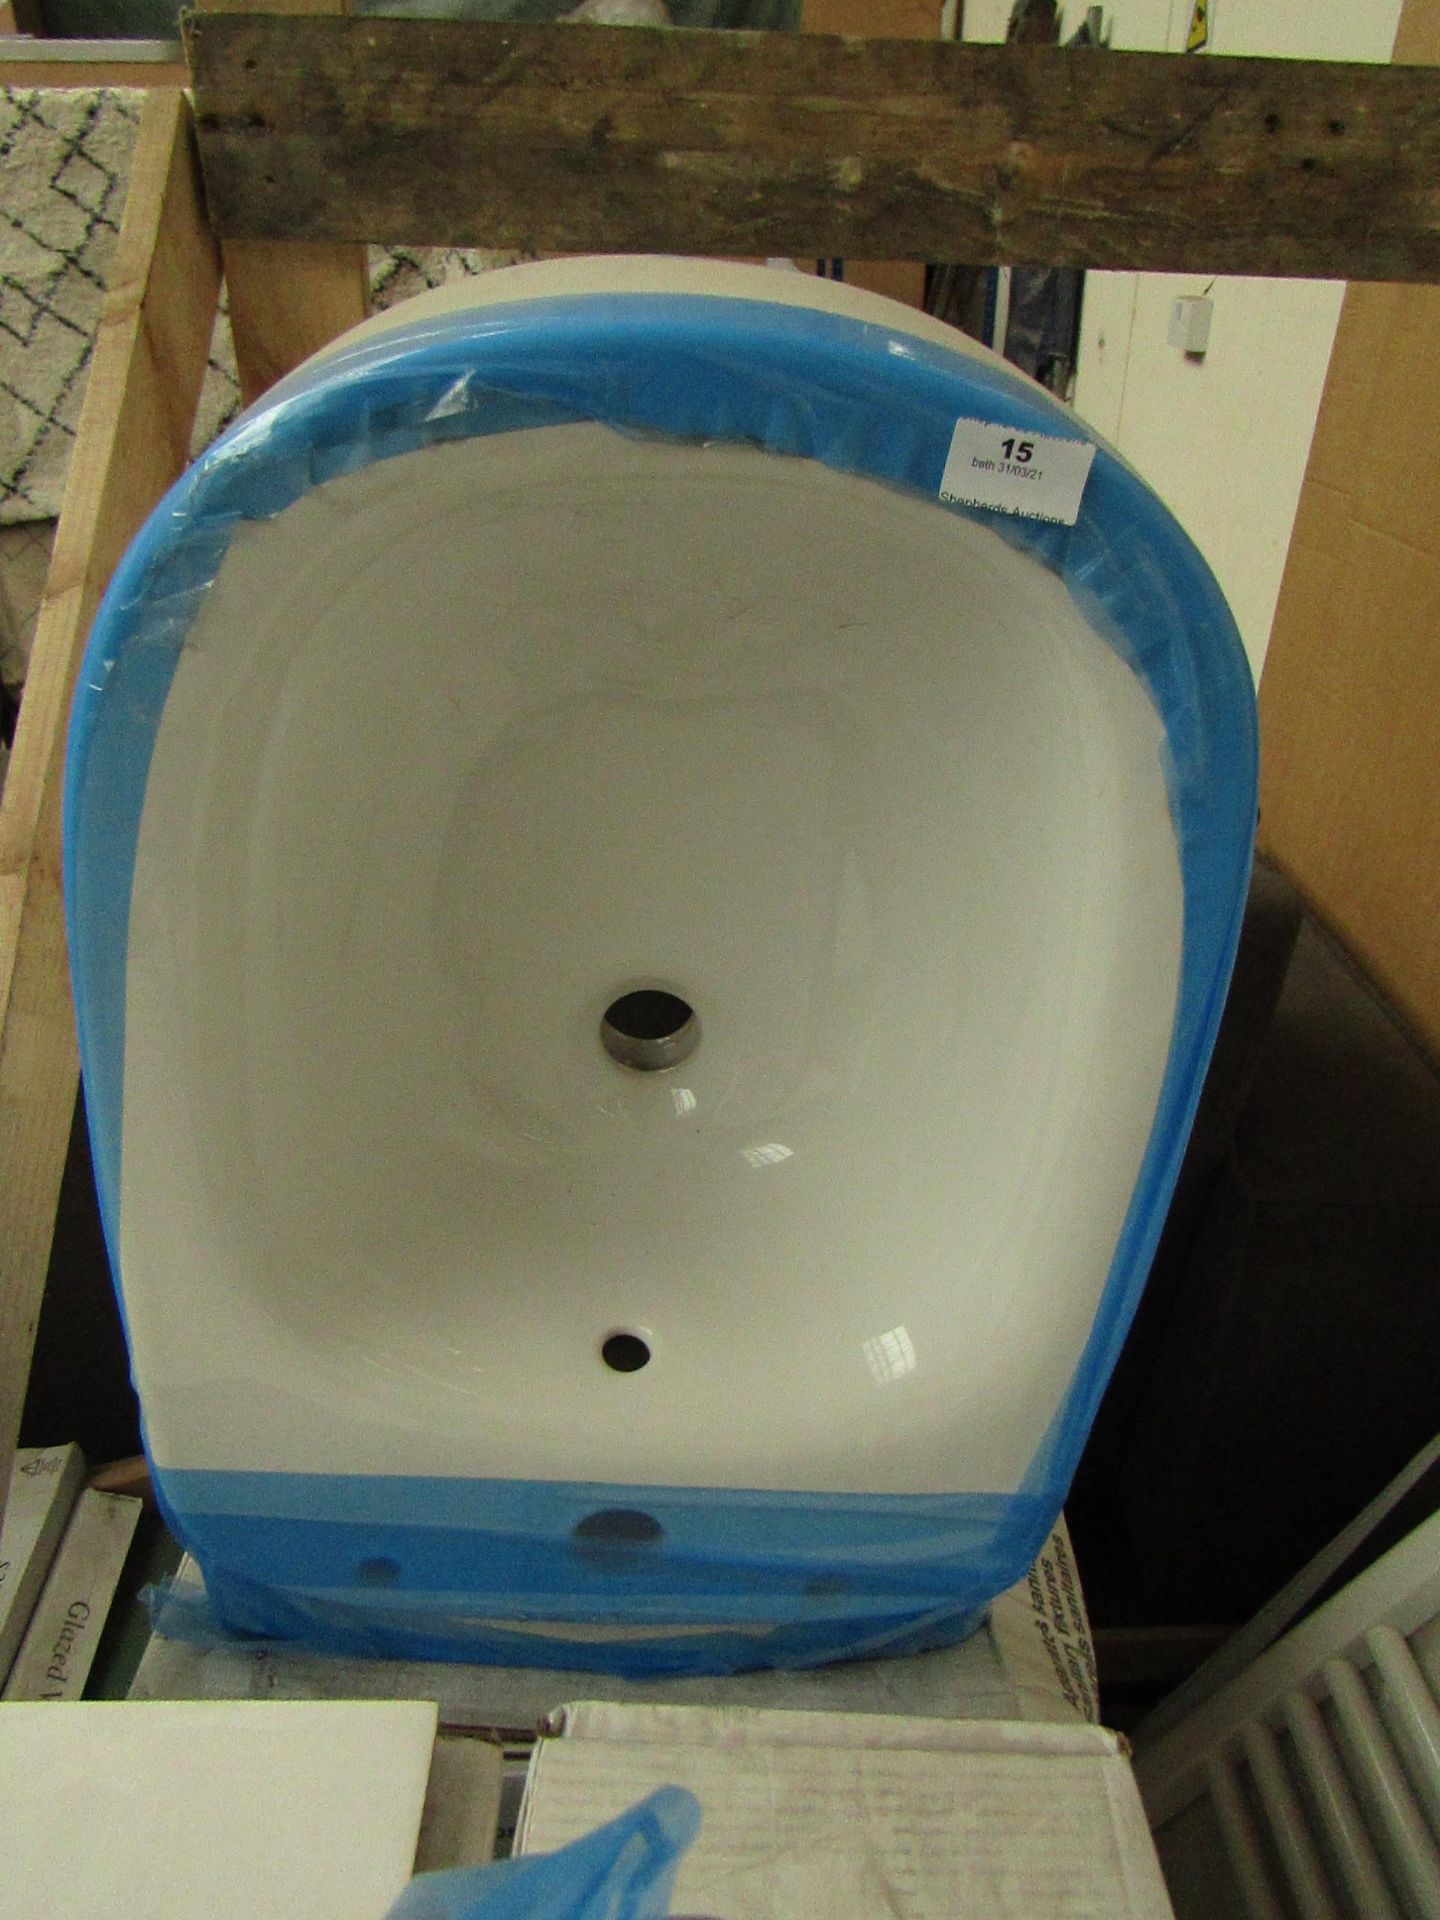 Roca Beyond bidet, new and boxed. RRP £462.00 | Picture is for display purposes only and does not